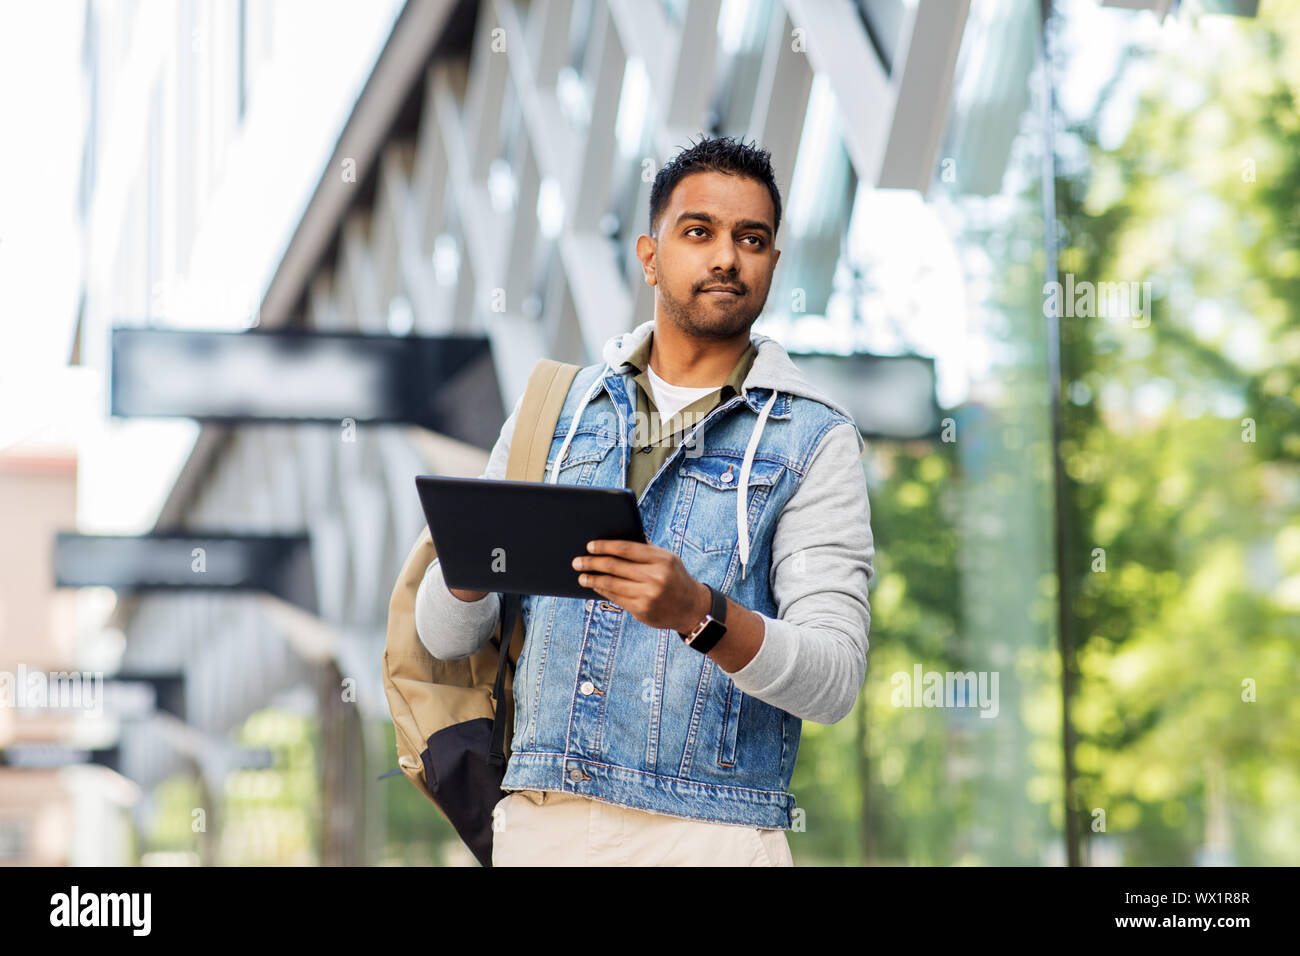 man with tablet pc and backpack on city street Stock Photo